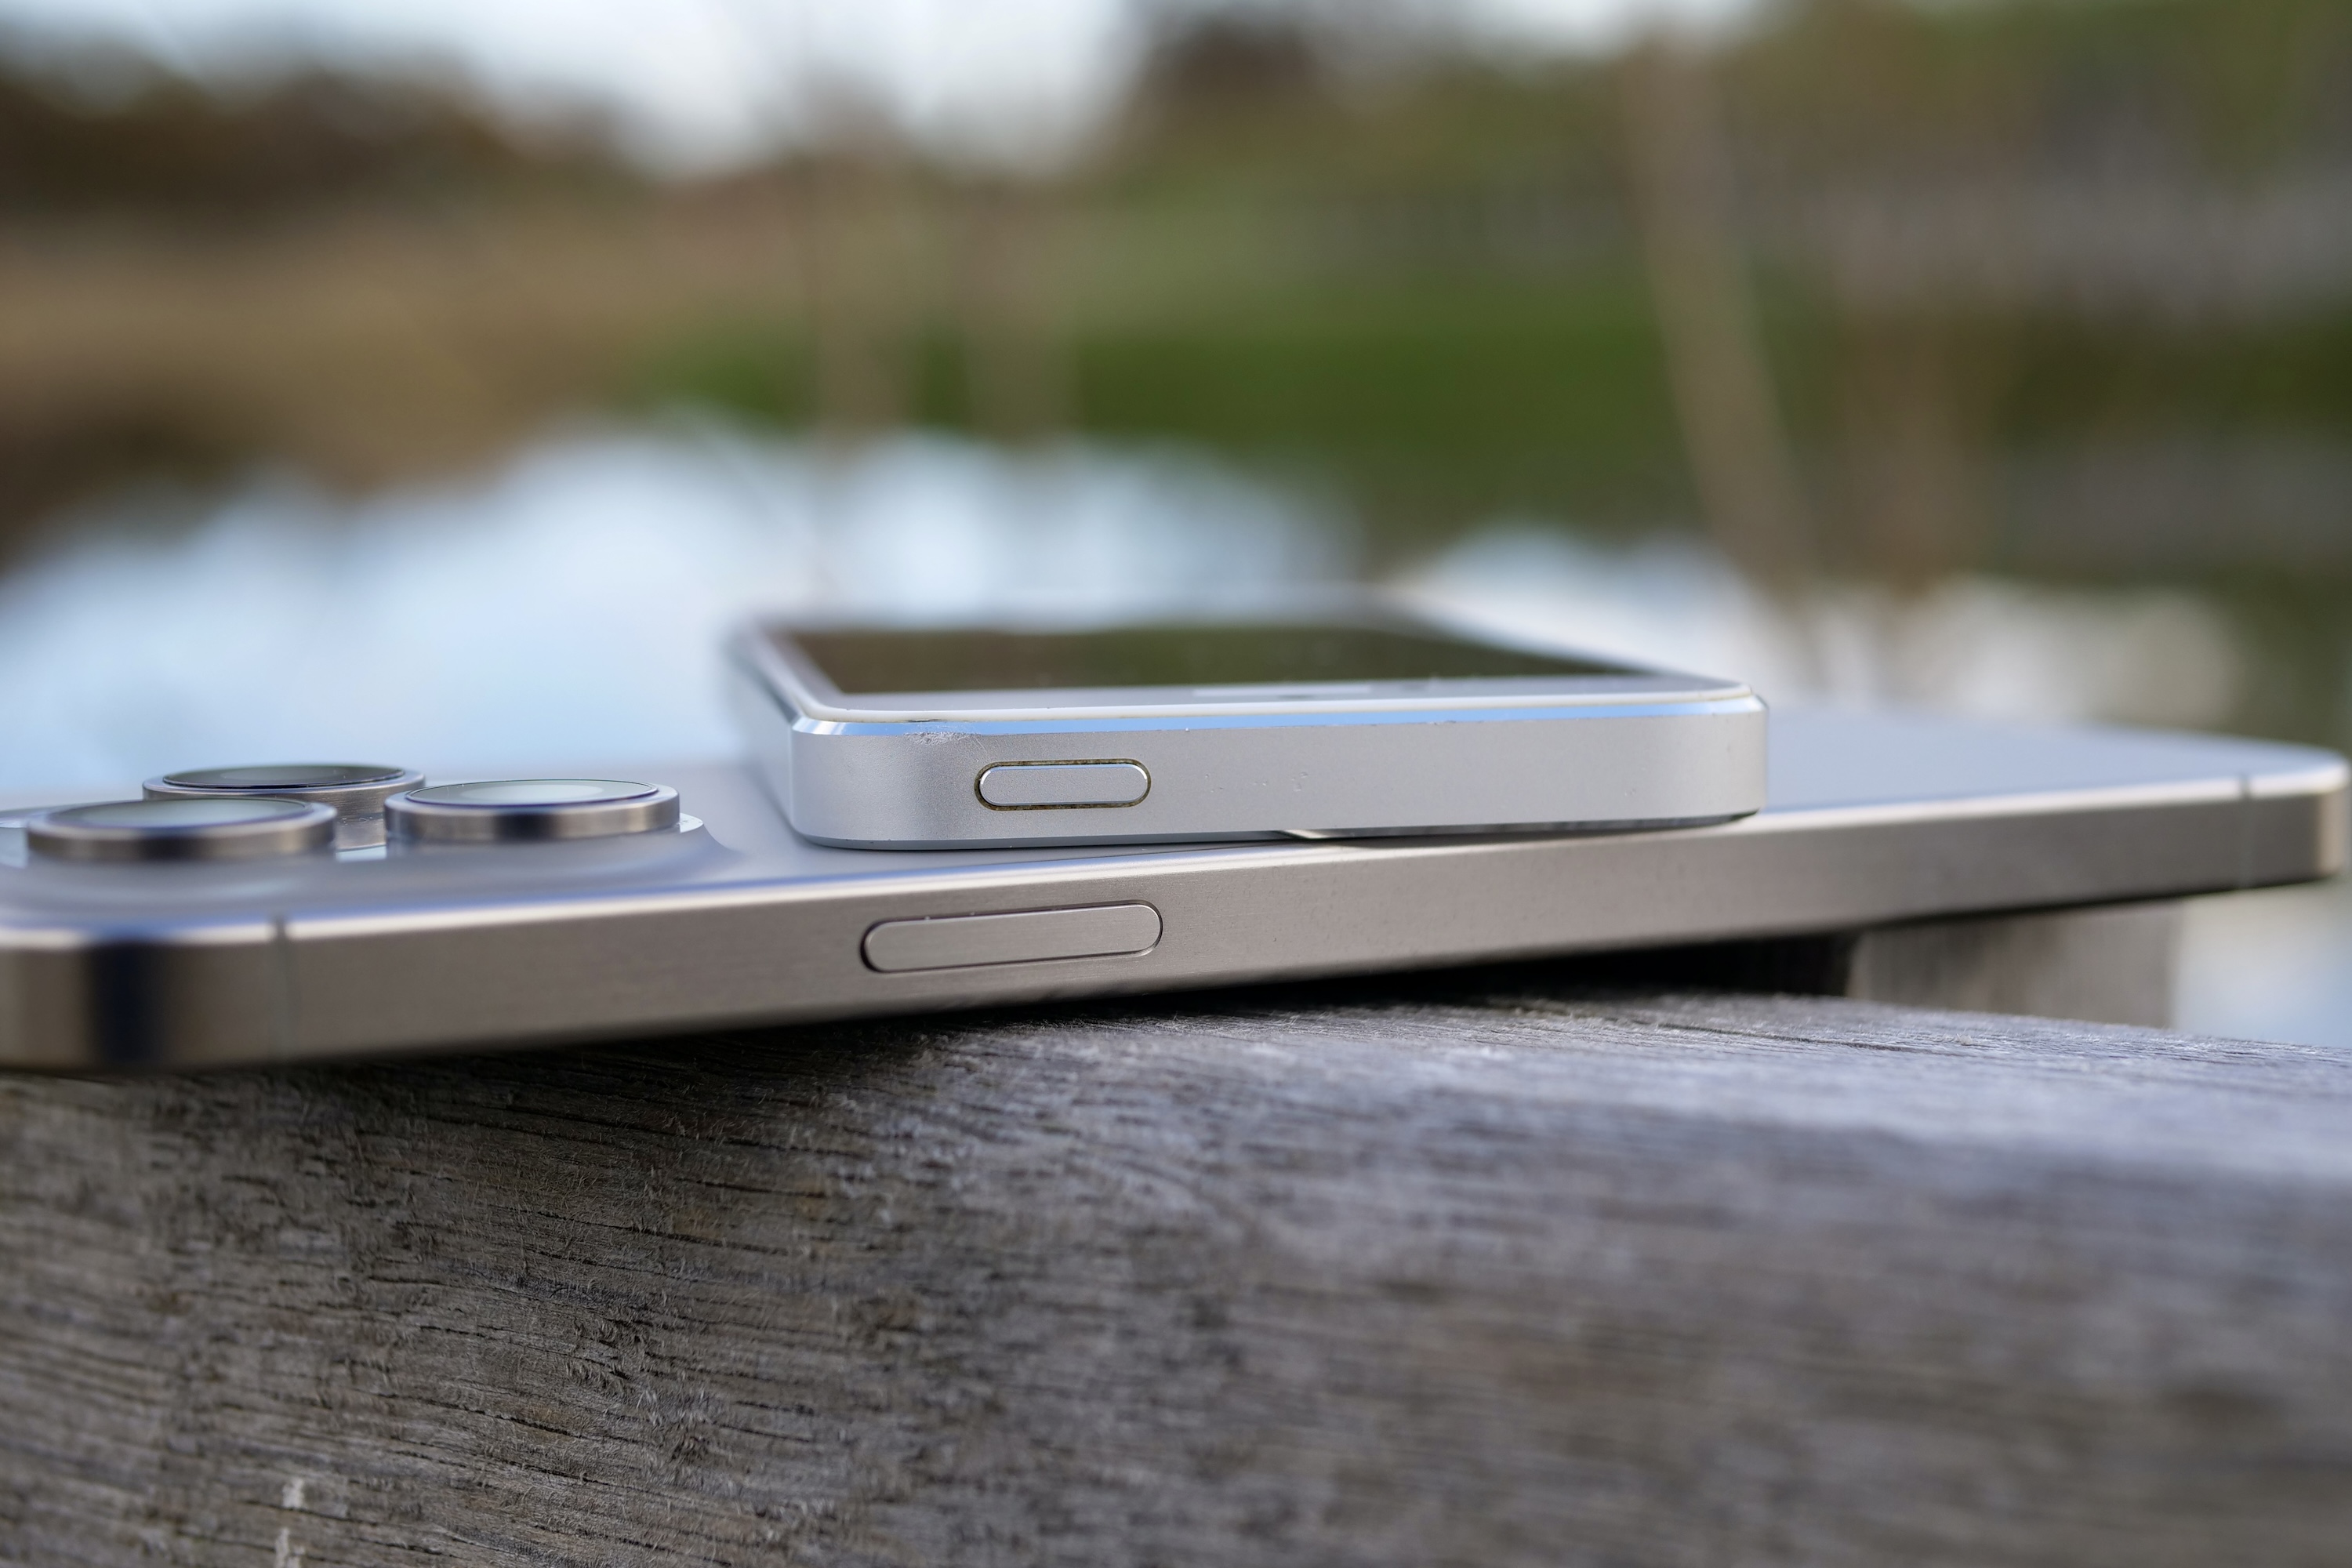 The iPhone 5 and iPhone 15 Pro Max's power buttons